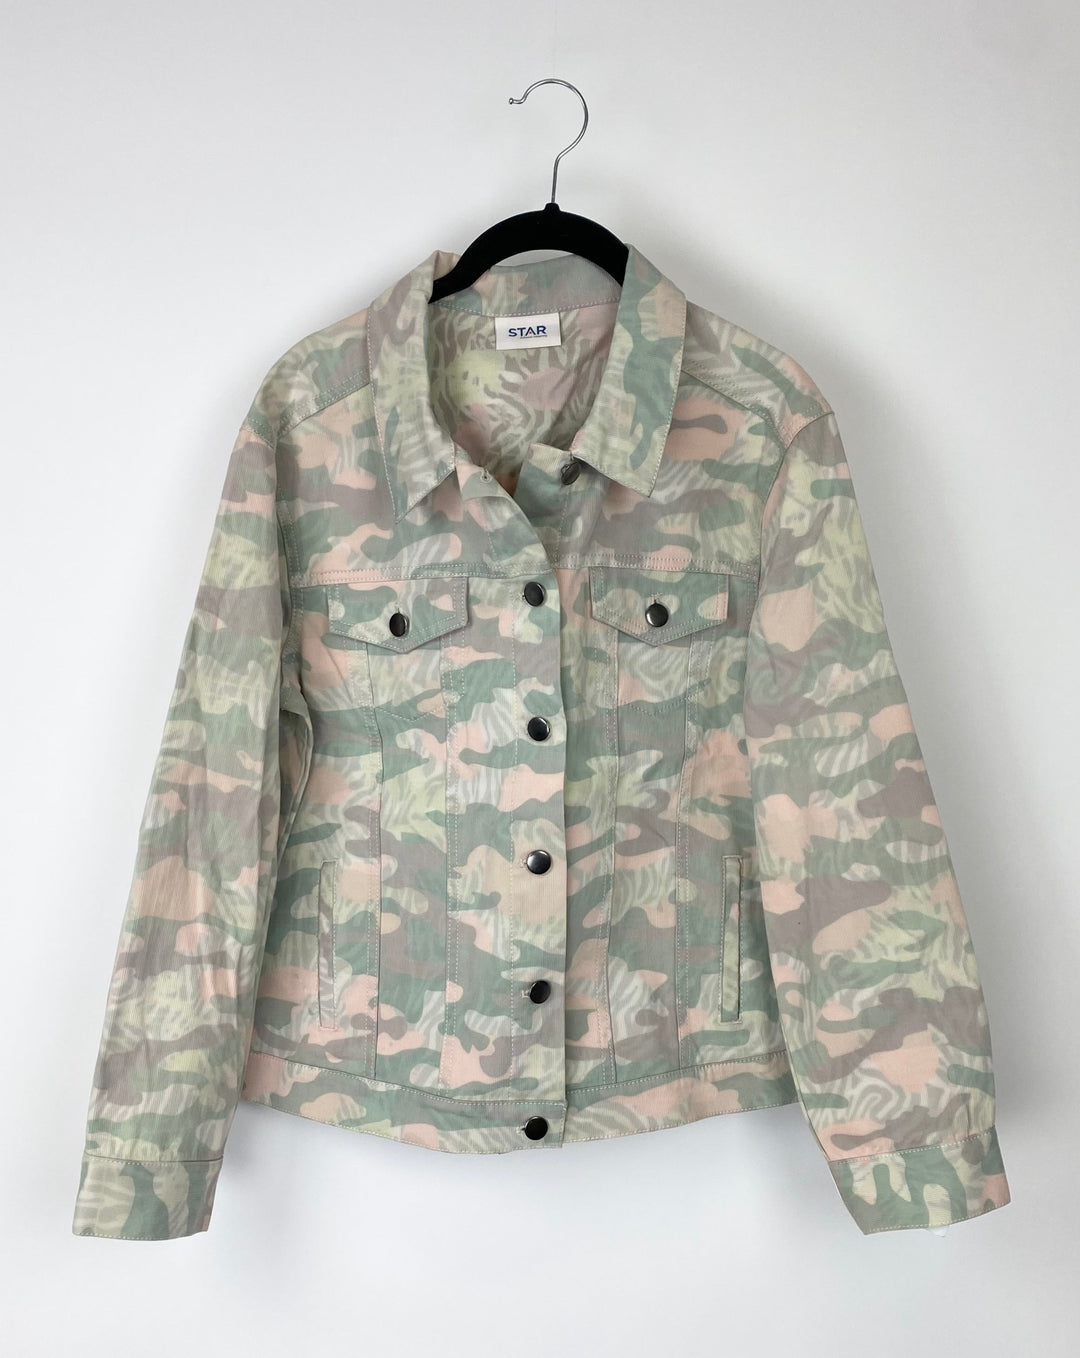 Colorful Camouflage Jacket - Small